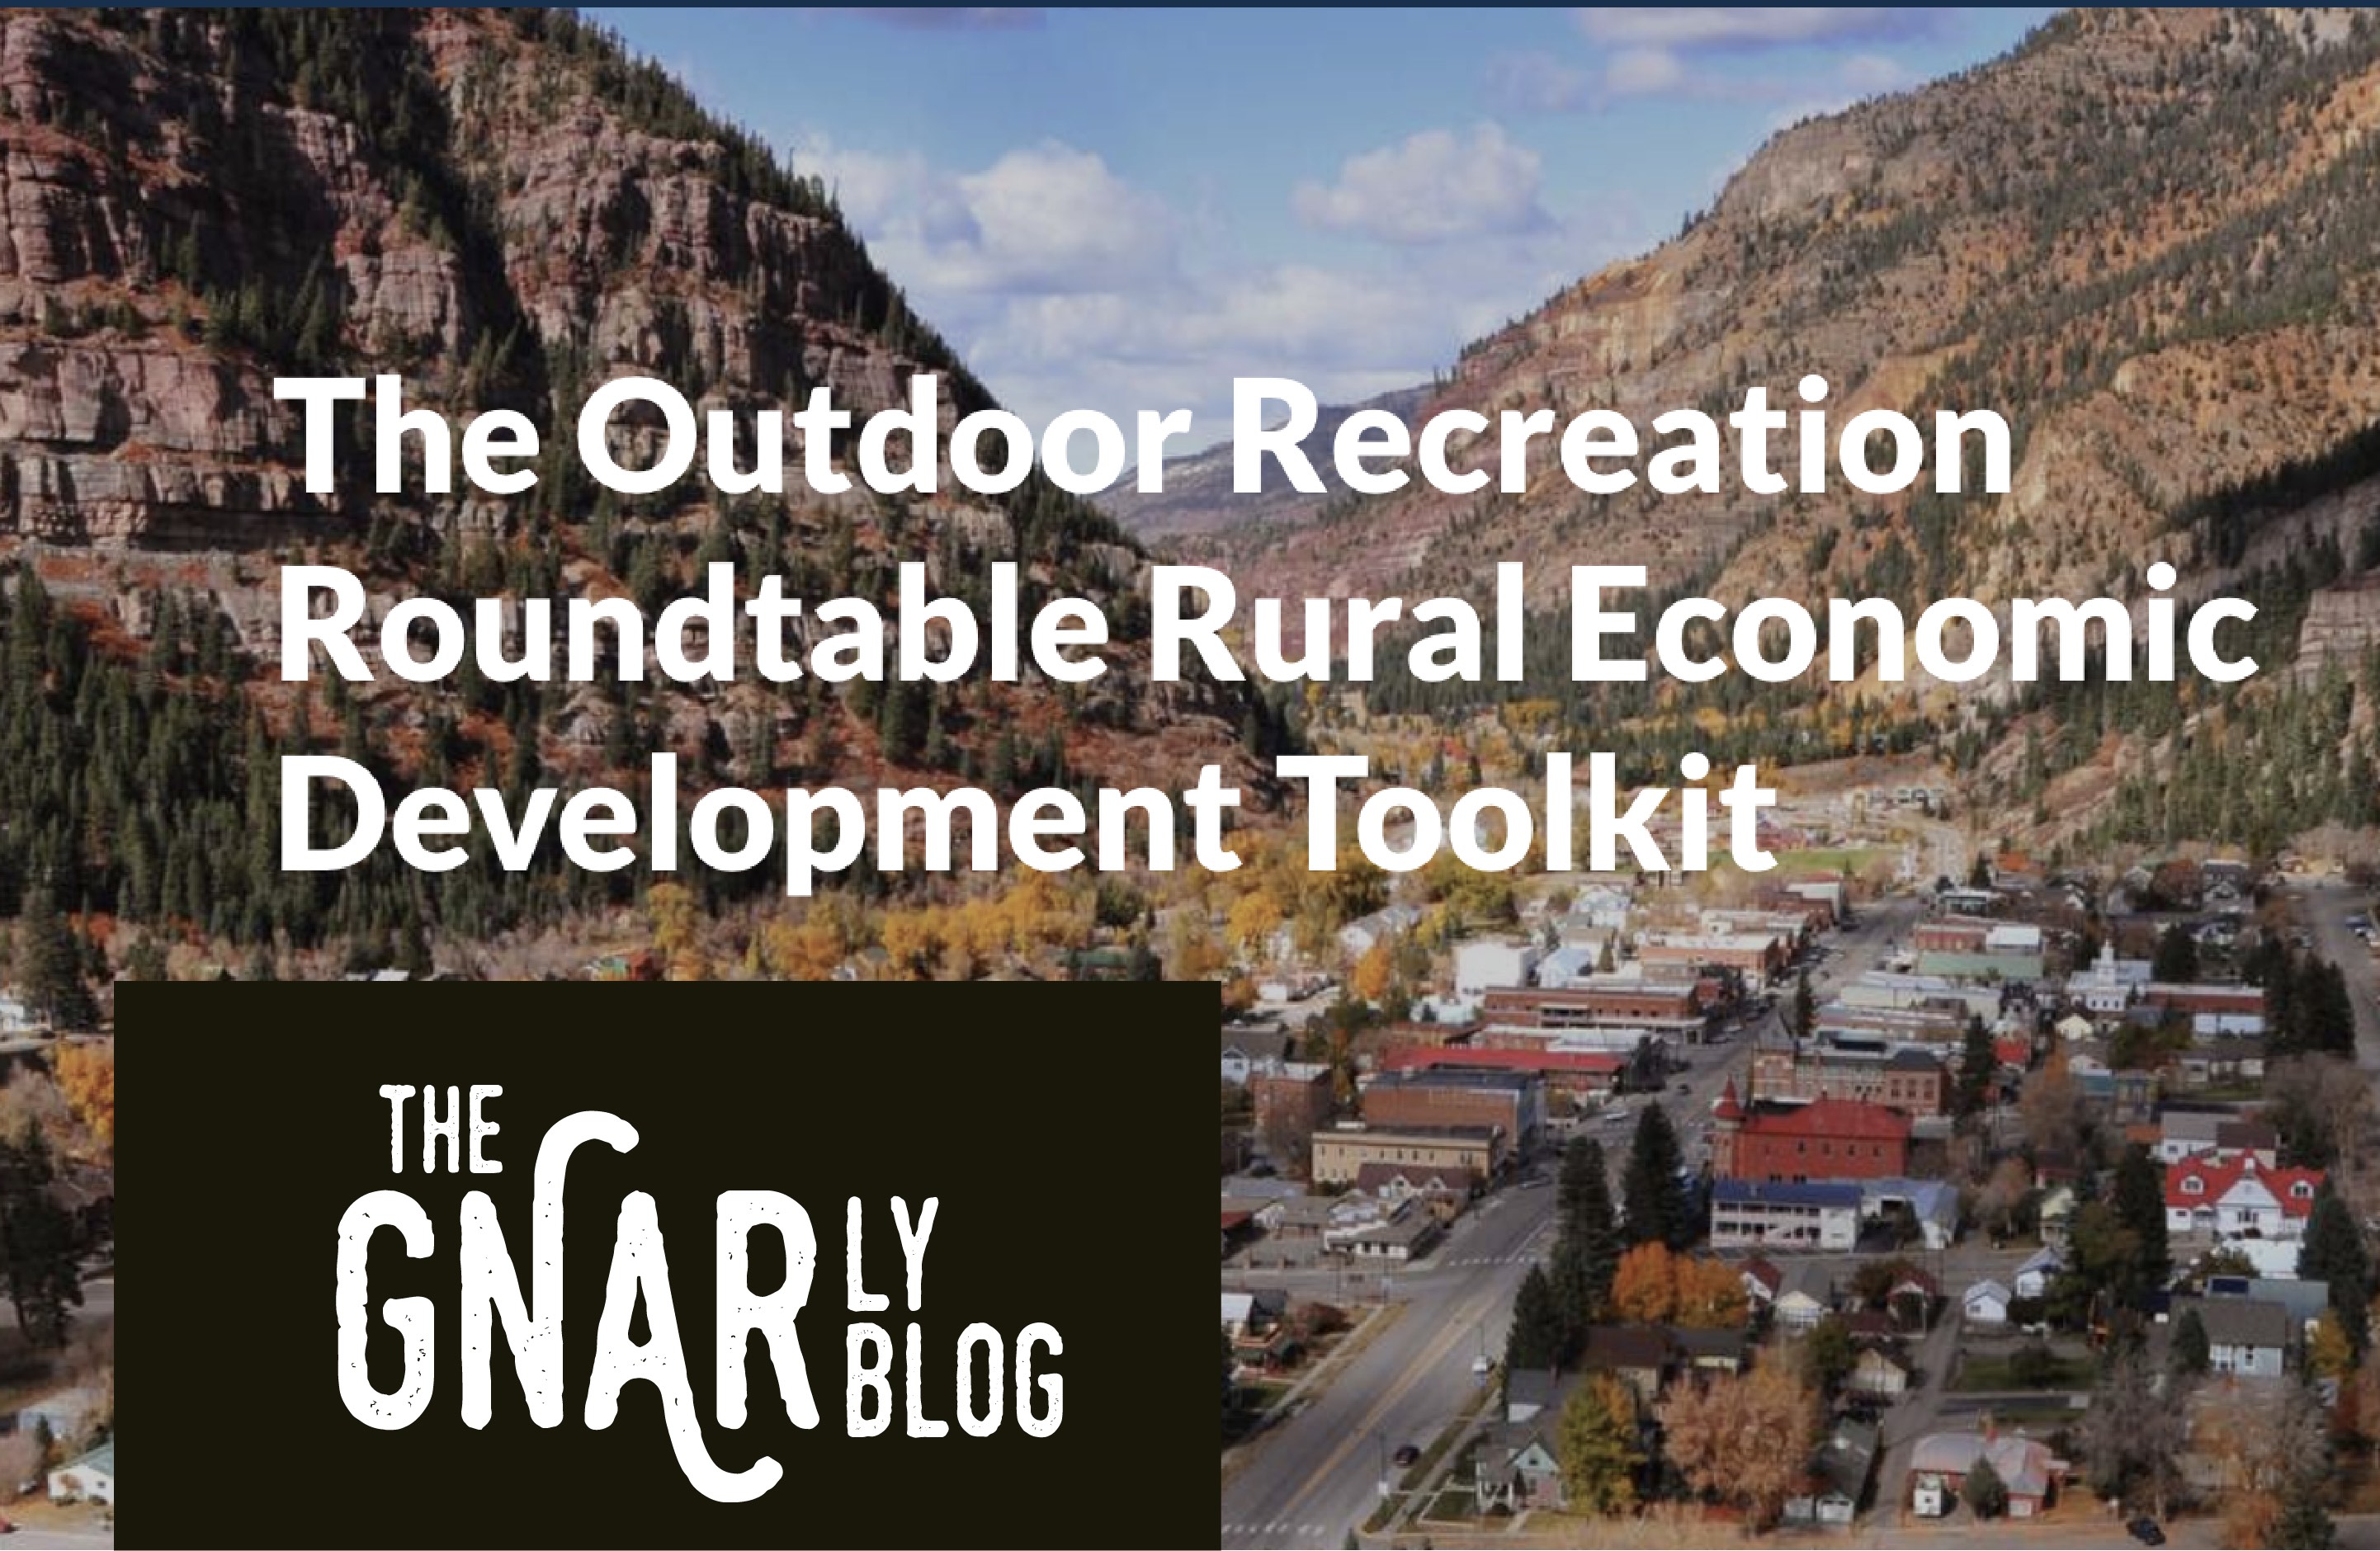 A Dive into the Rural Economic Development Toolkit from the Outdoor Recreation Roundtable